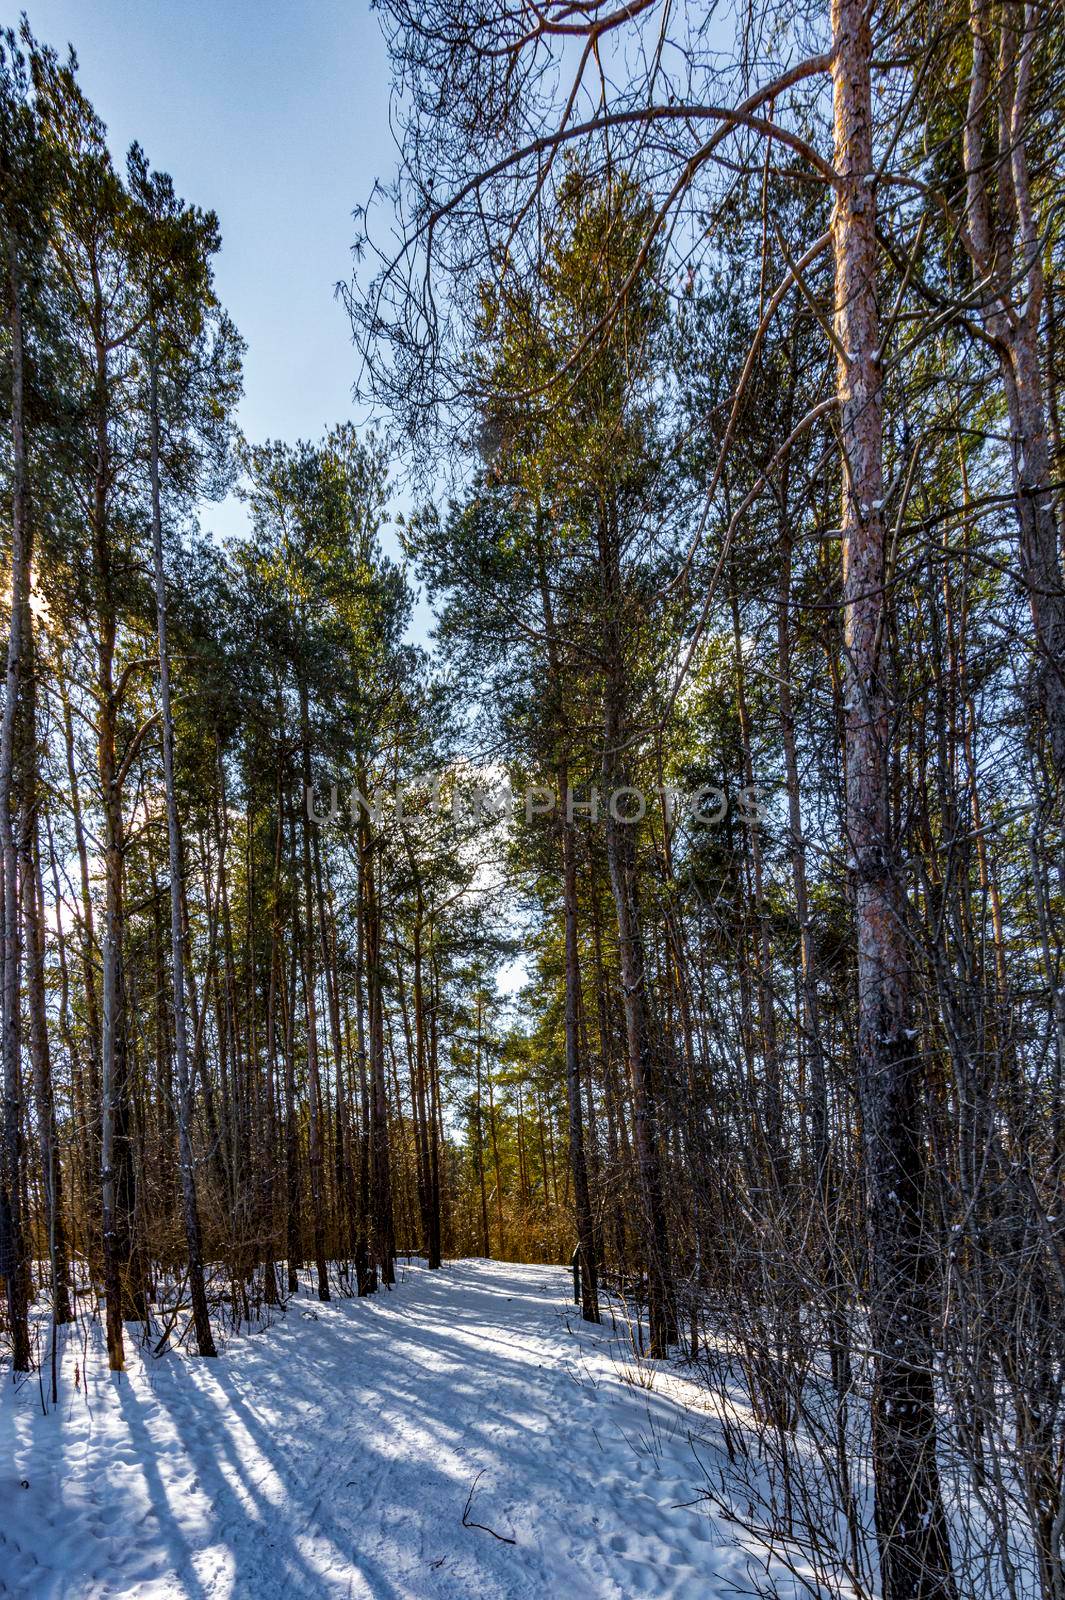 A ray of winter sun illuminated an alley in a pine forest  by ben44